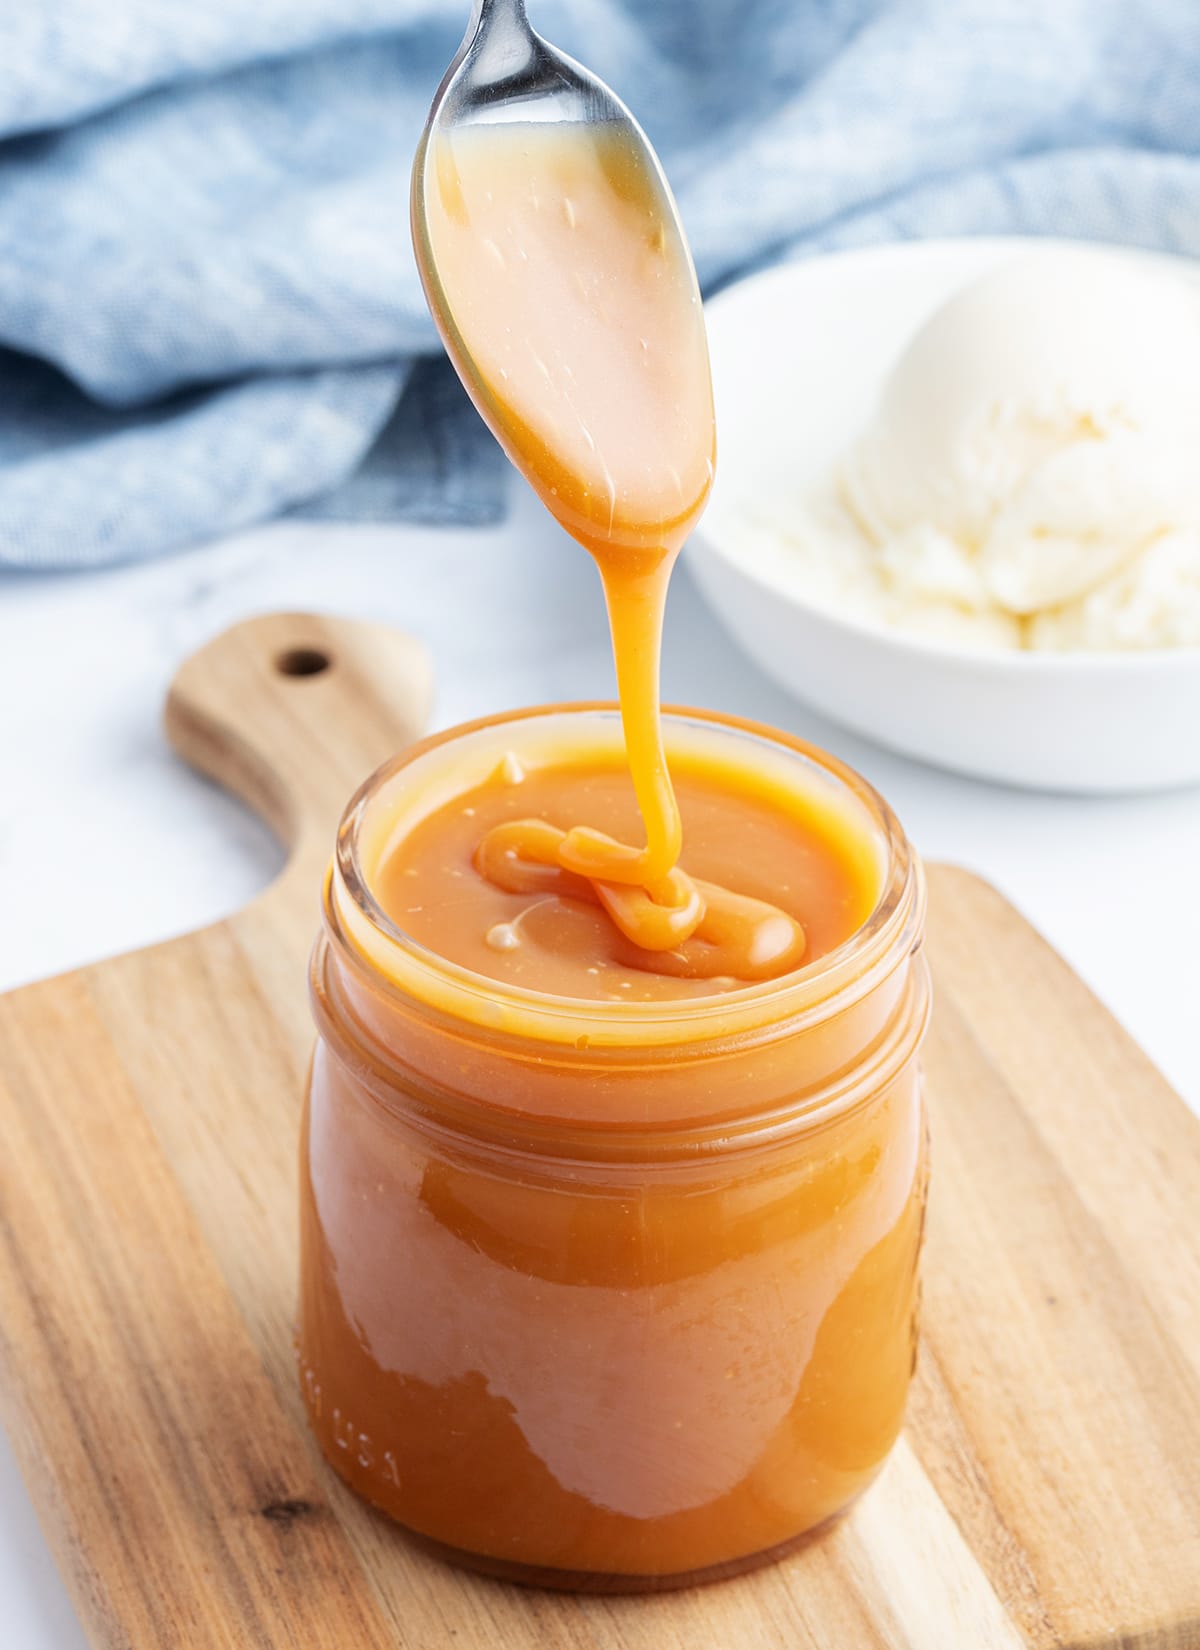 A spoonful of salted caramel drizzling into a jar of the sauce.